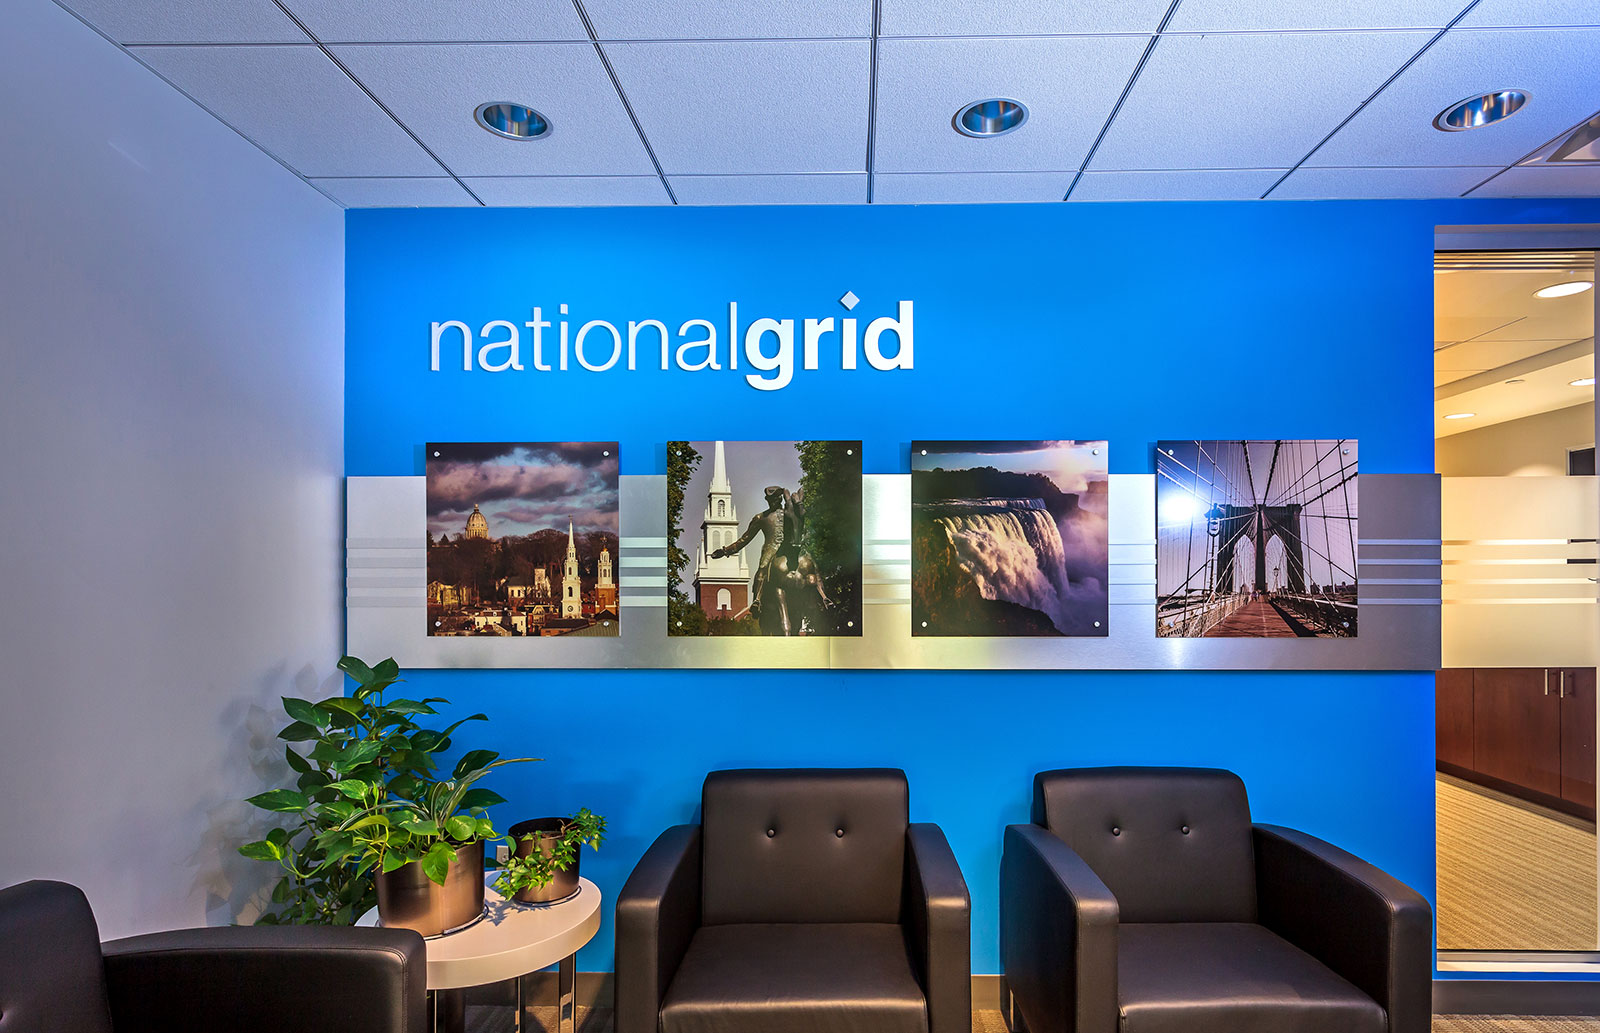 Commercial Branded Environment, National Grid Corporate Lobby, Graphic Design